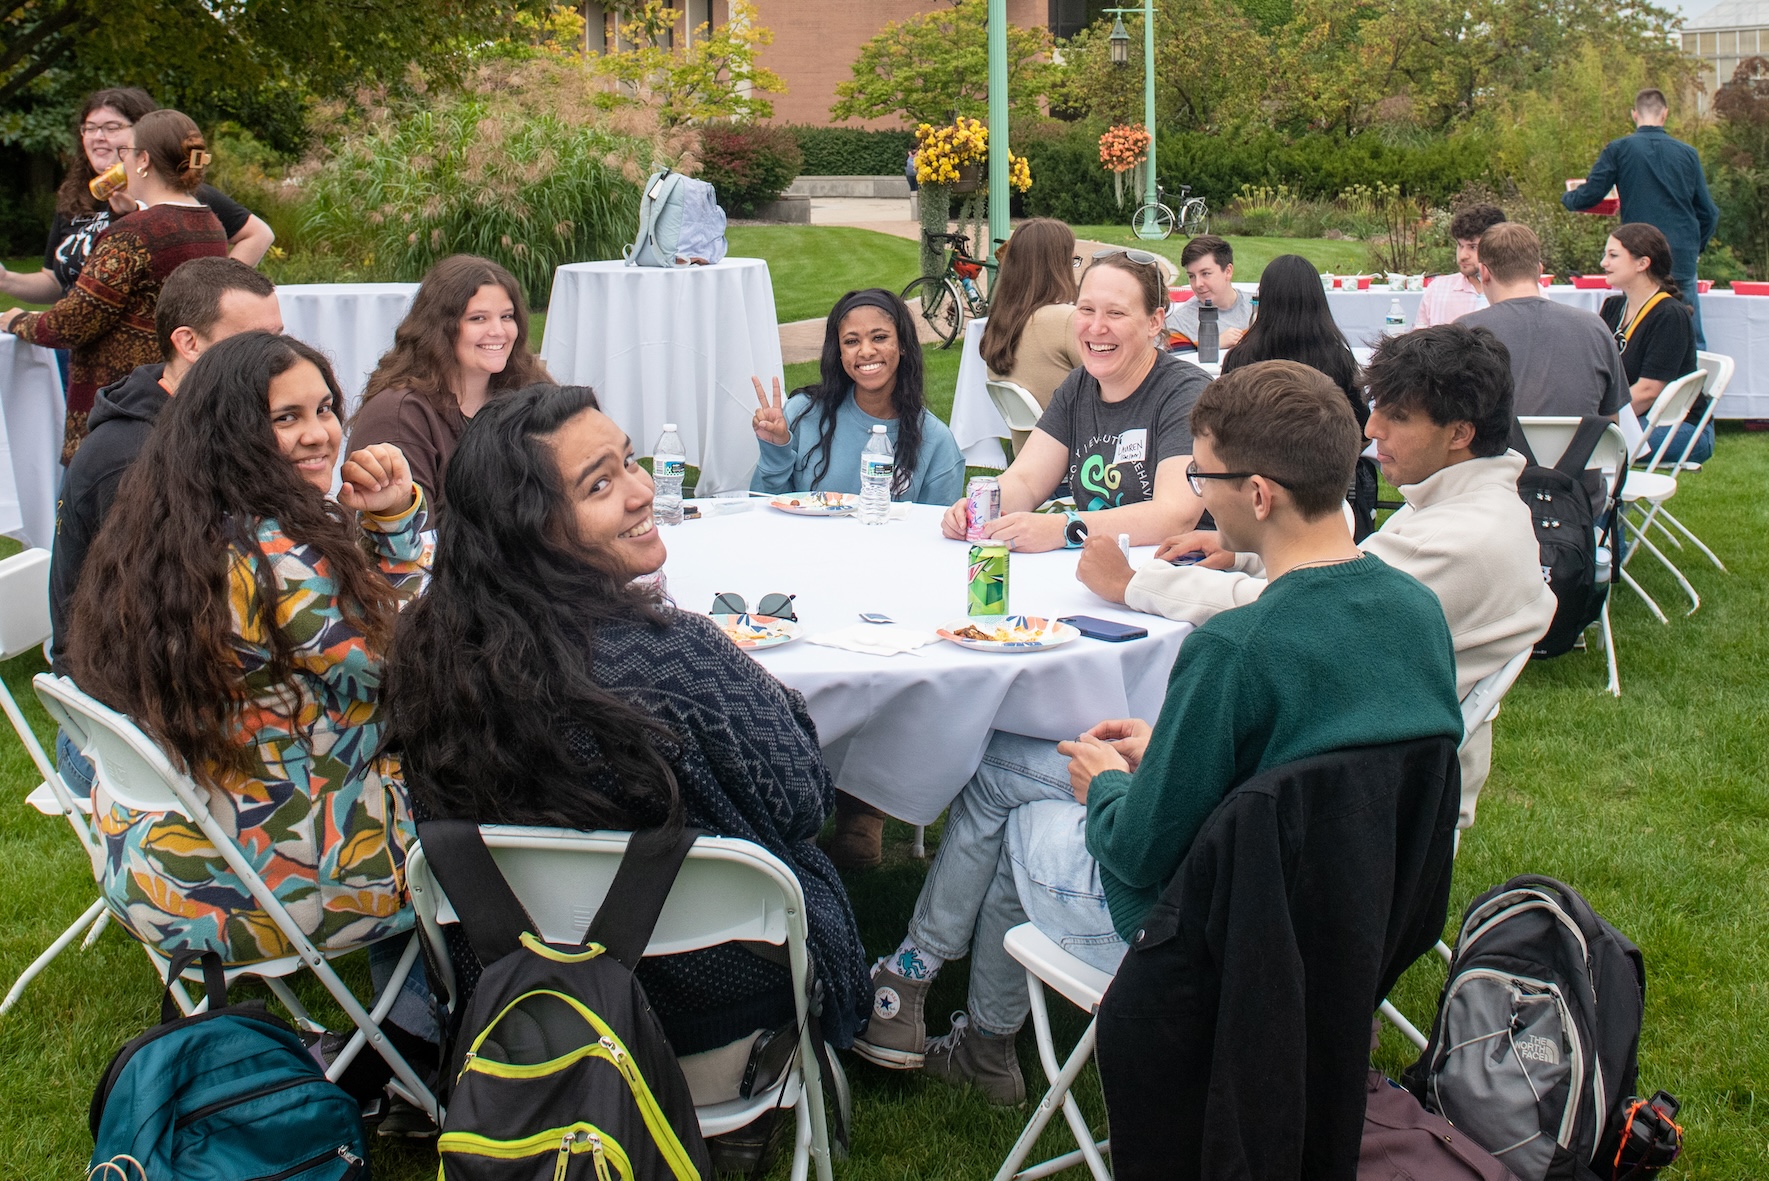 Envision EEB participants sit at a table during an outdoor reception